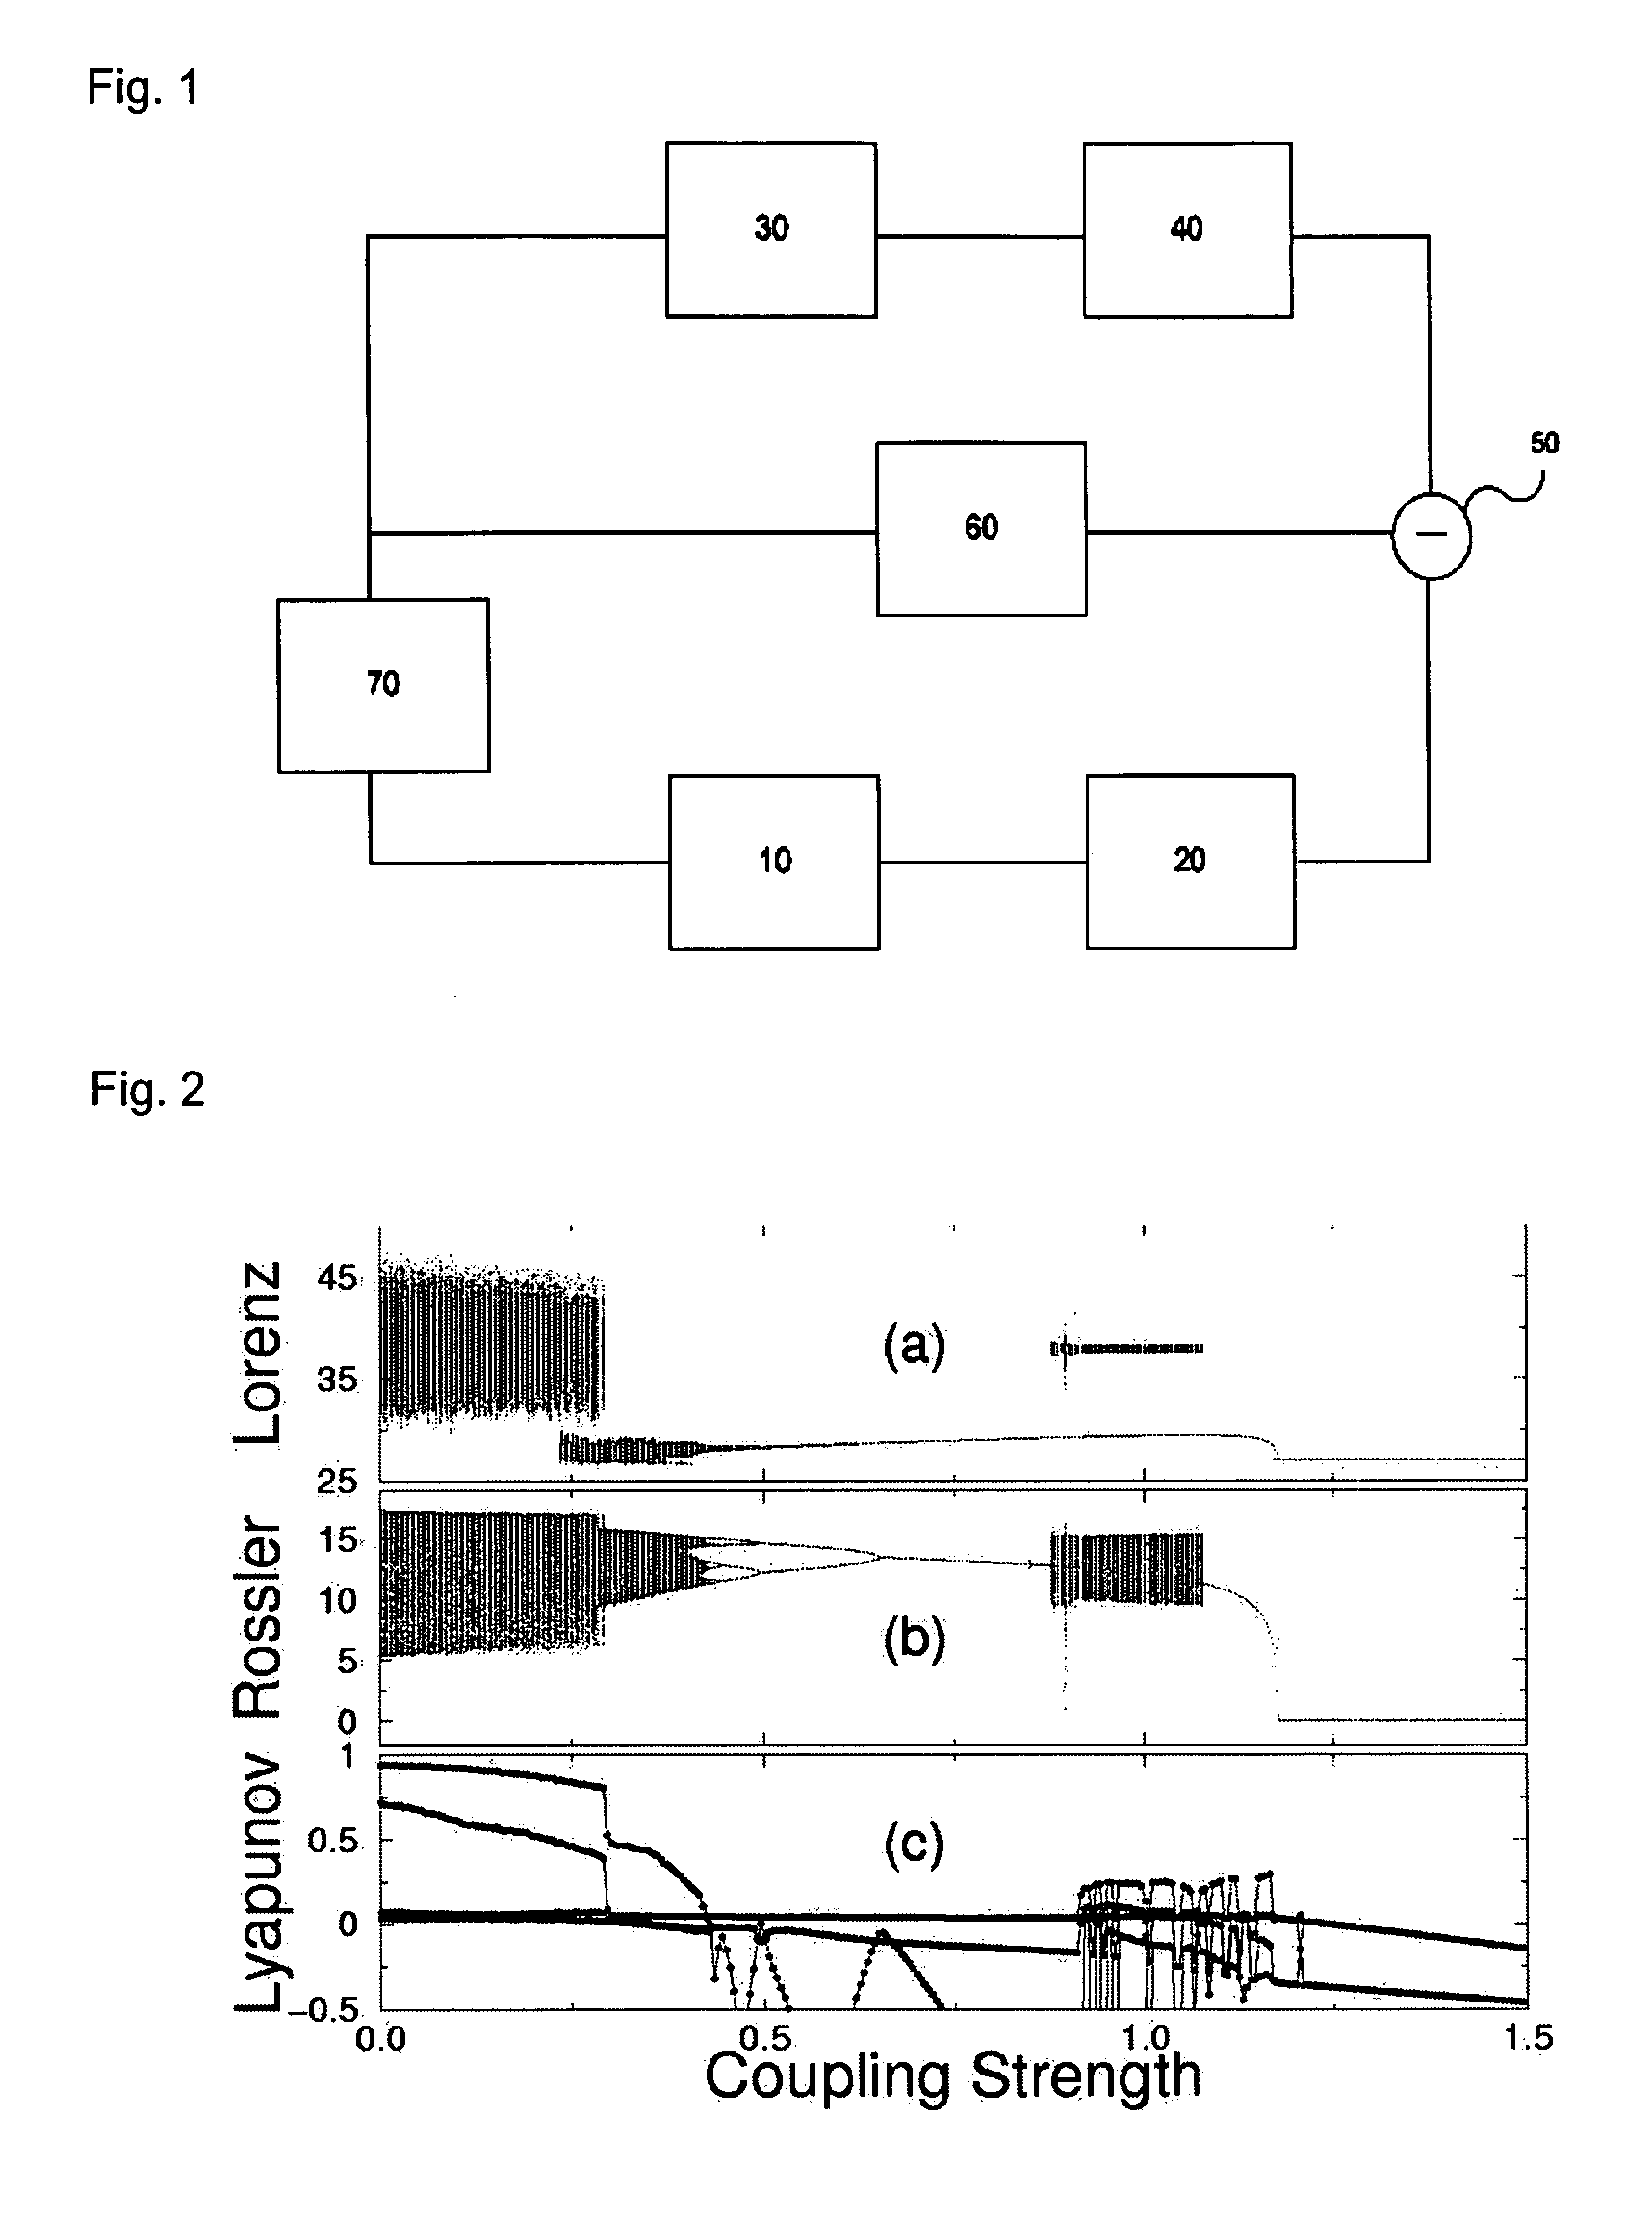 Apparatus for controlling chaos using oscillation quenching